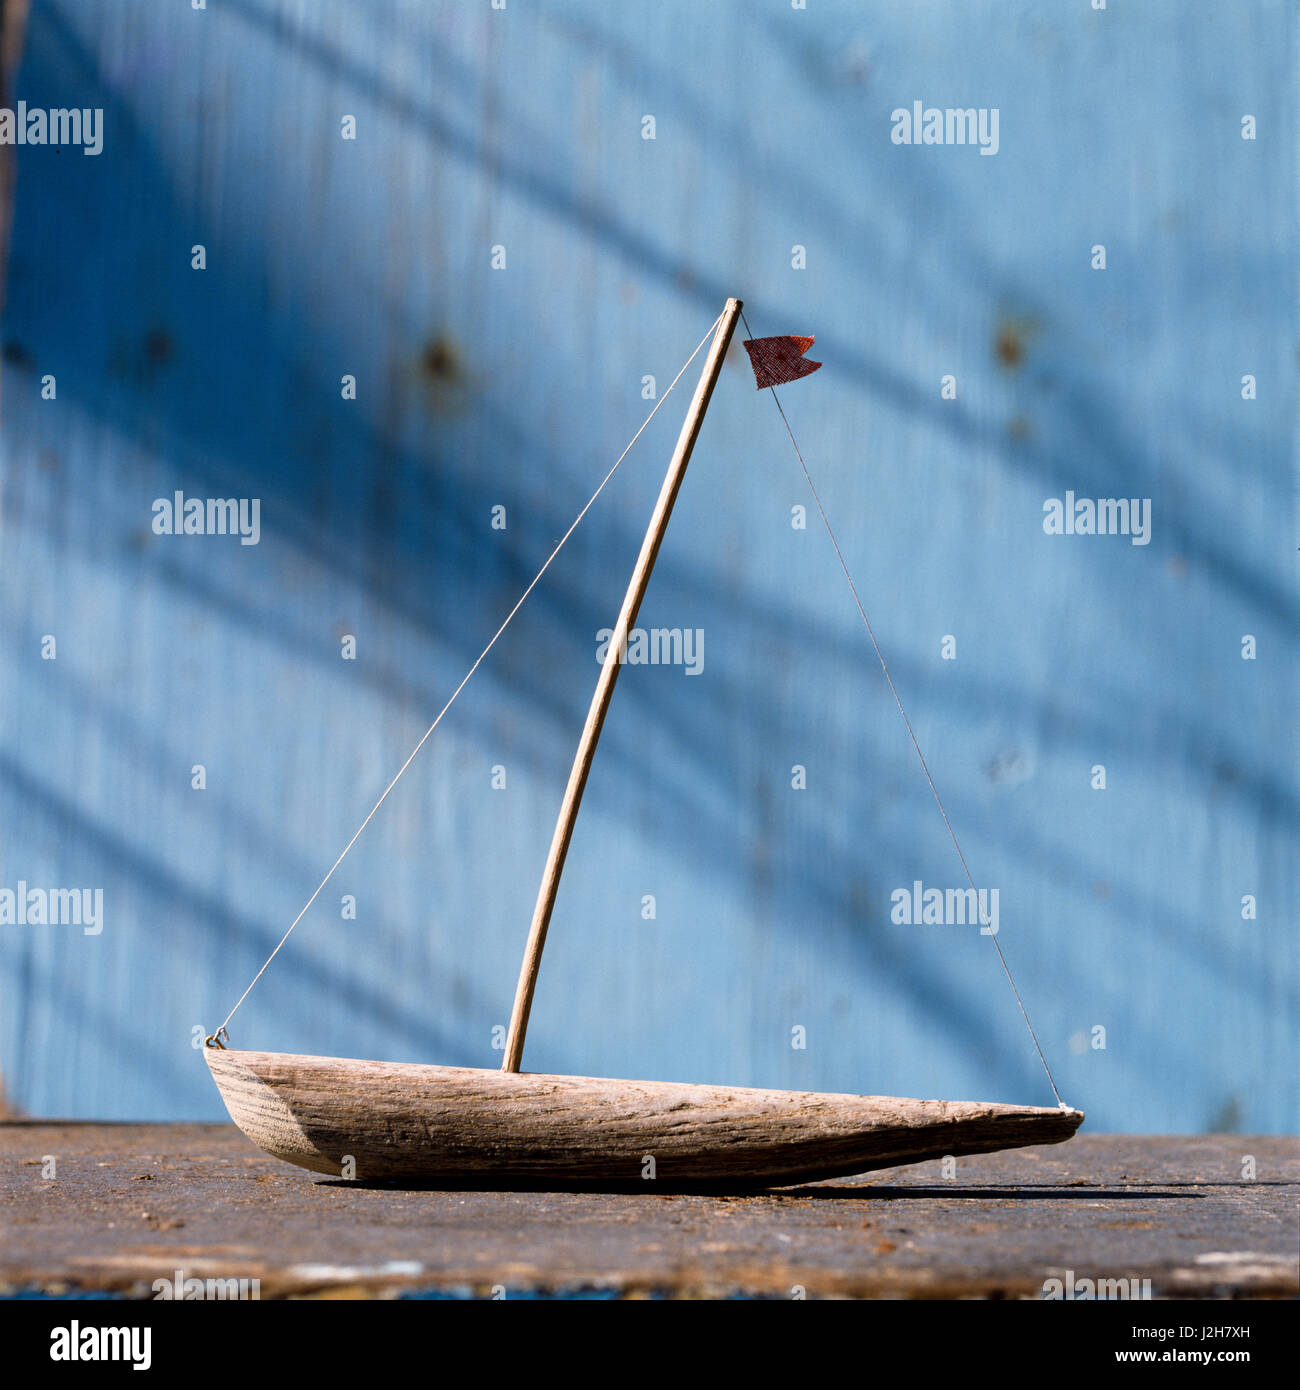 Model boat made of wood. Stock Photo